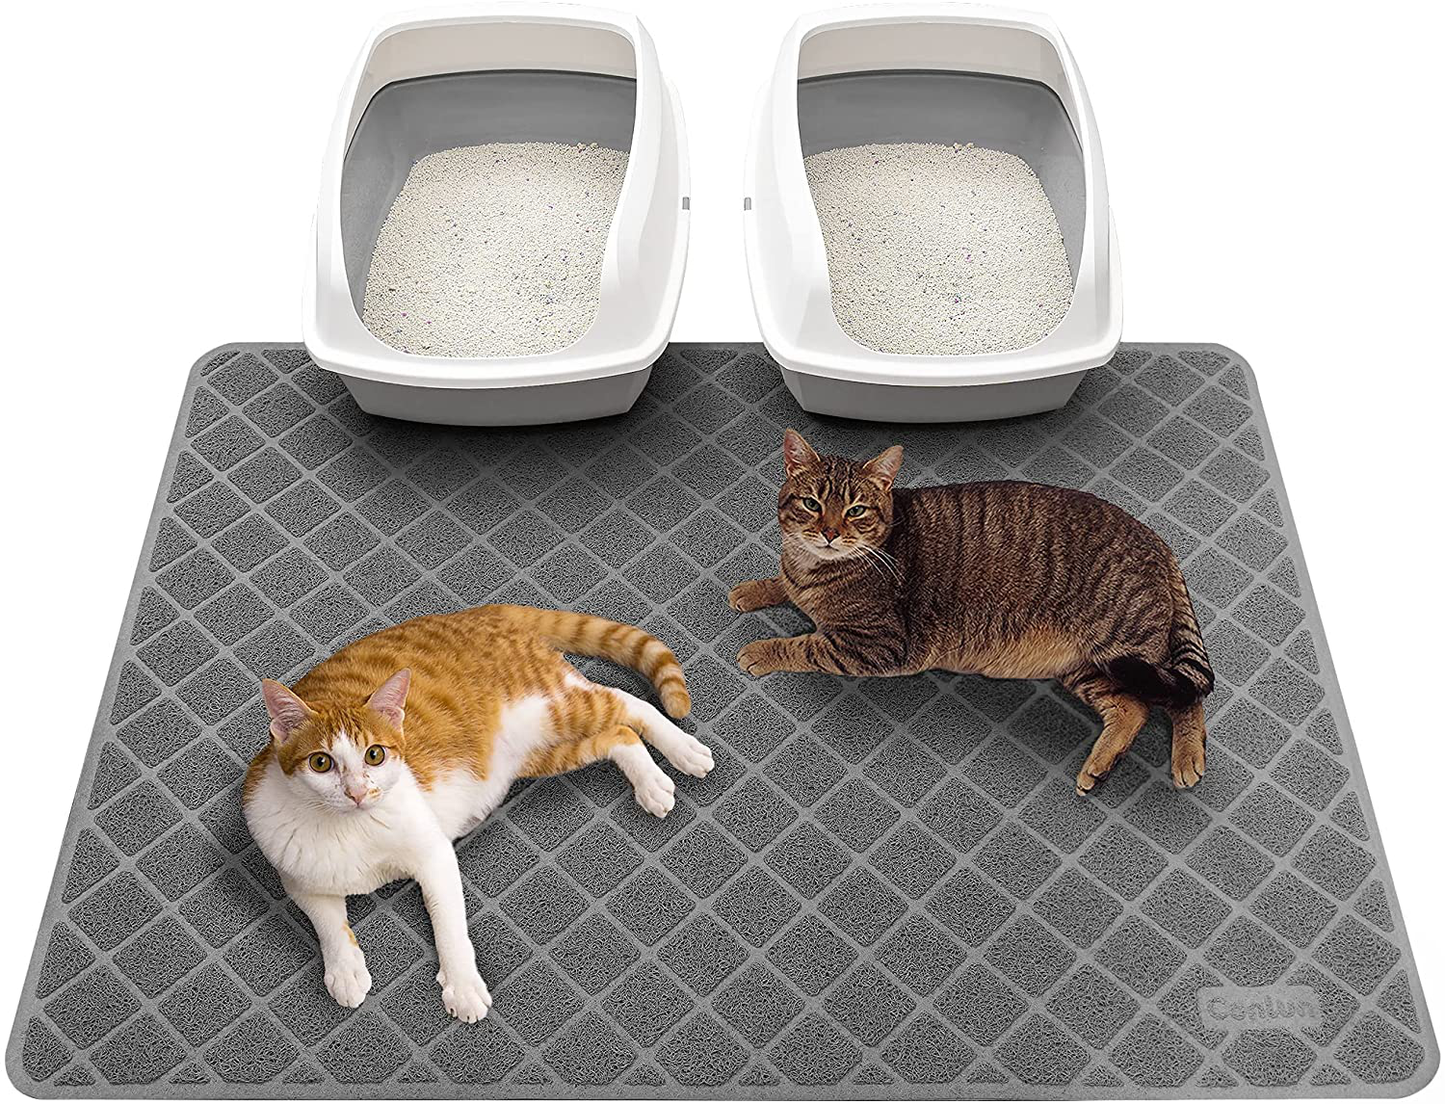 Conlun Cat Litter Mat Litter Trapping Mat, Premium Durable PVC Grid Mesh with Scatter Control, Non-Slip, Less Waste Cat Litter Box Mat, Soft on Kitty’S Paws, Urine Waterproof, Washable Easy Clean